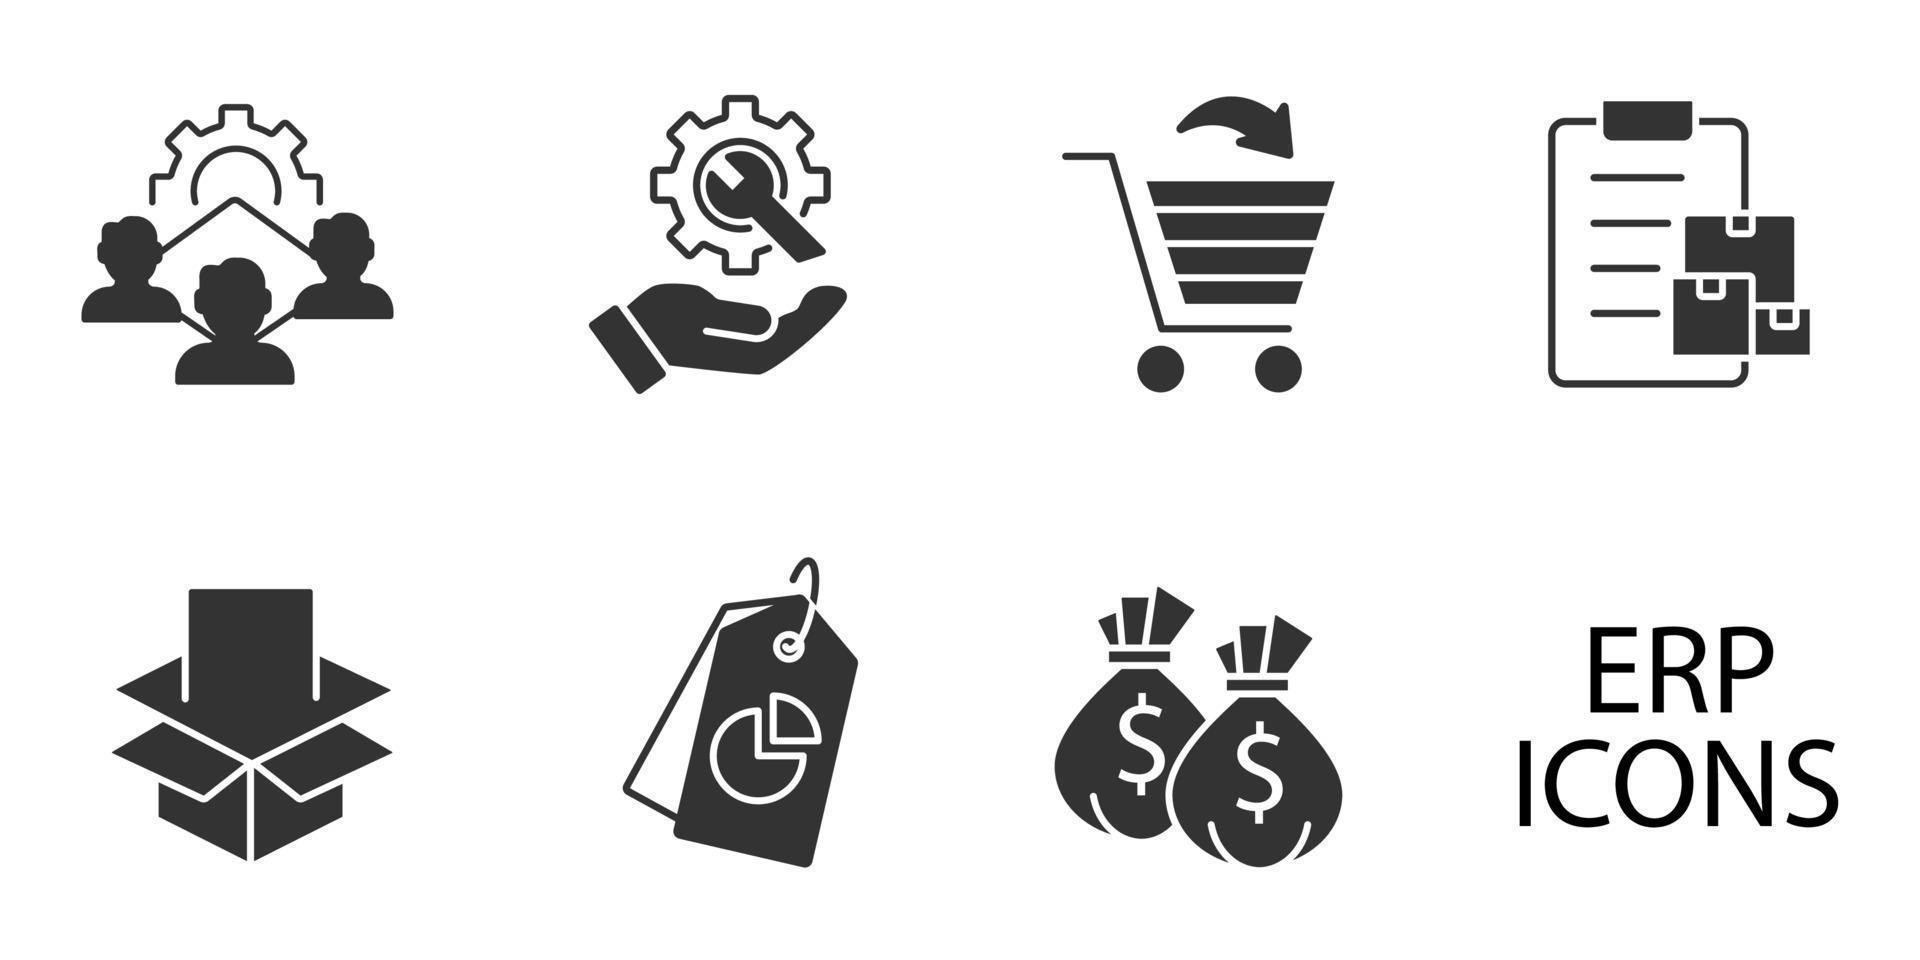 Enterprise resource planning icons set . Enterprise resource planning pack symbol vector elements for infographic web